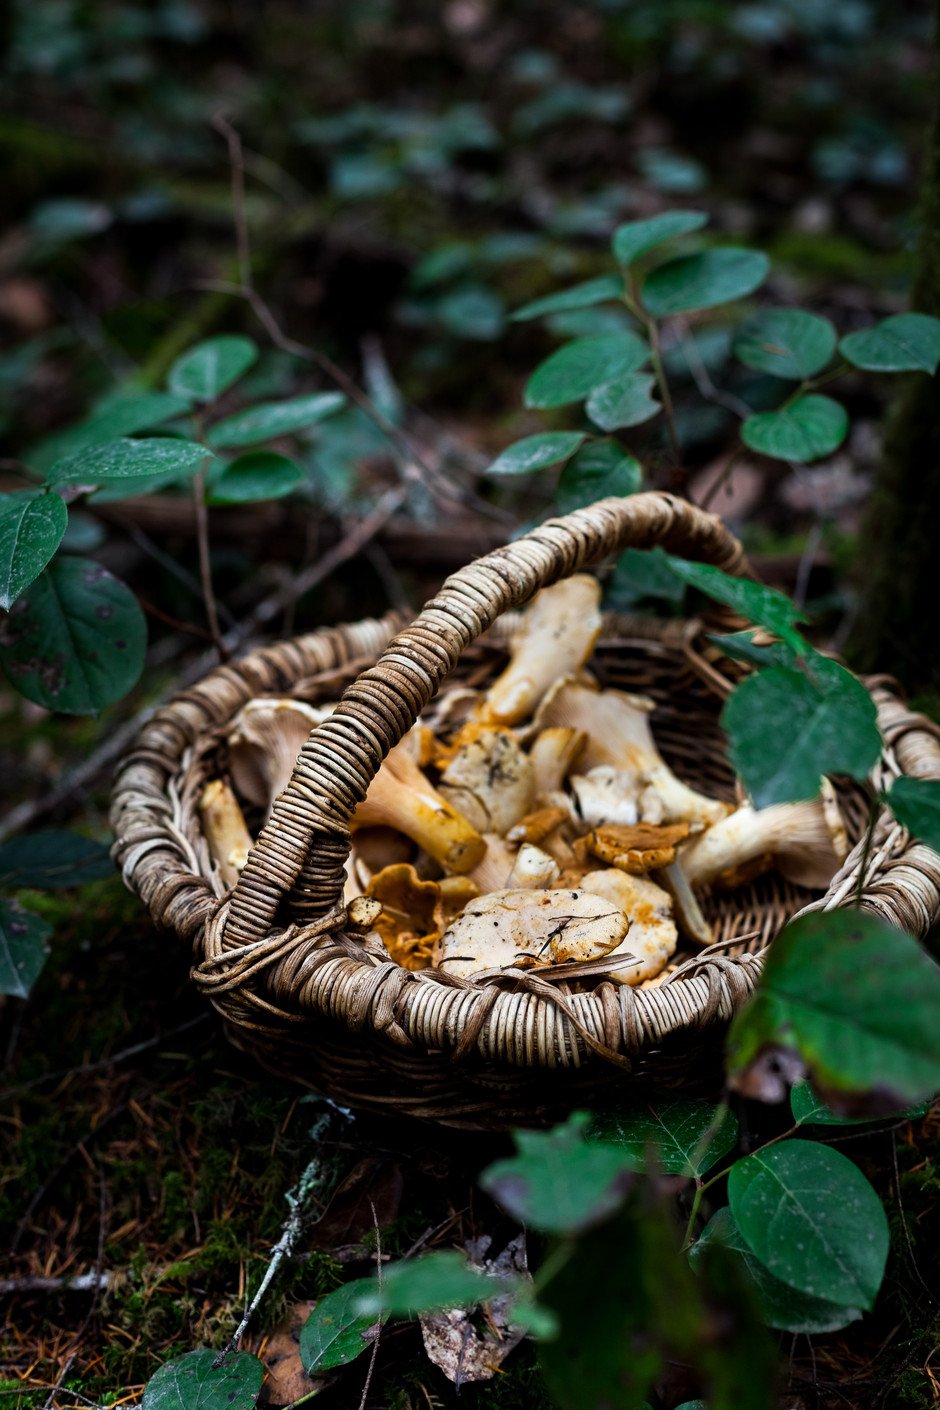 a basket of chanterelle mushrooms on the forest floor.